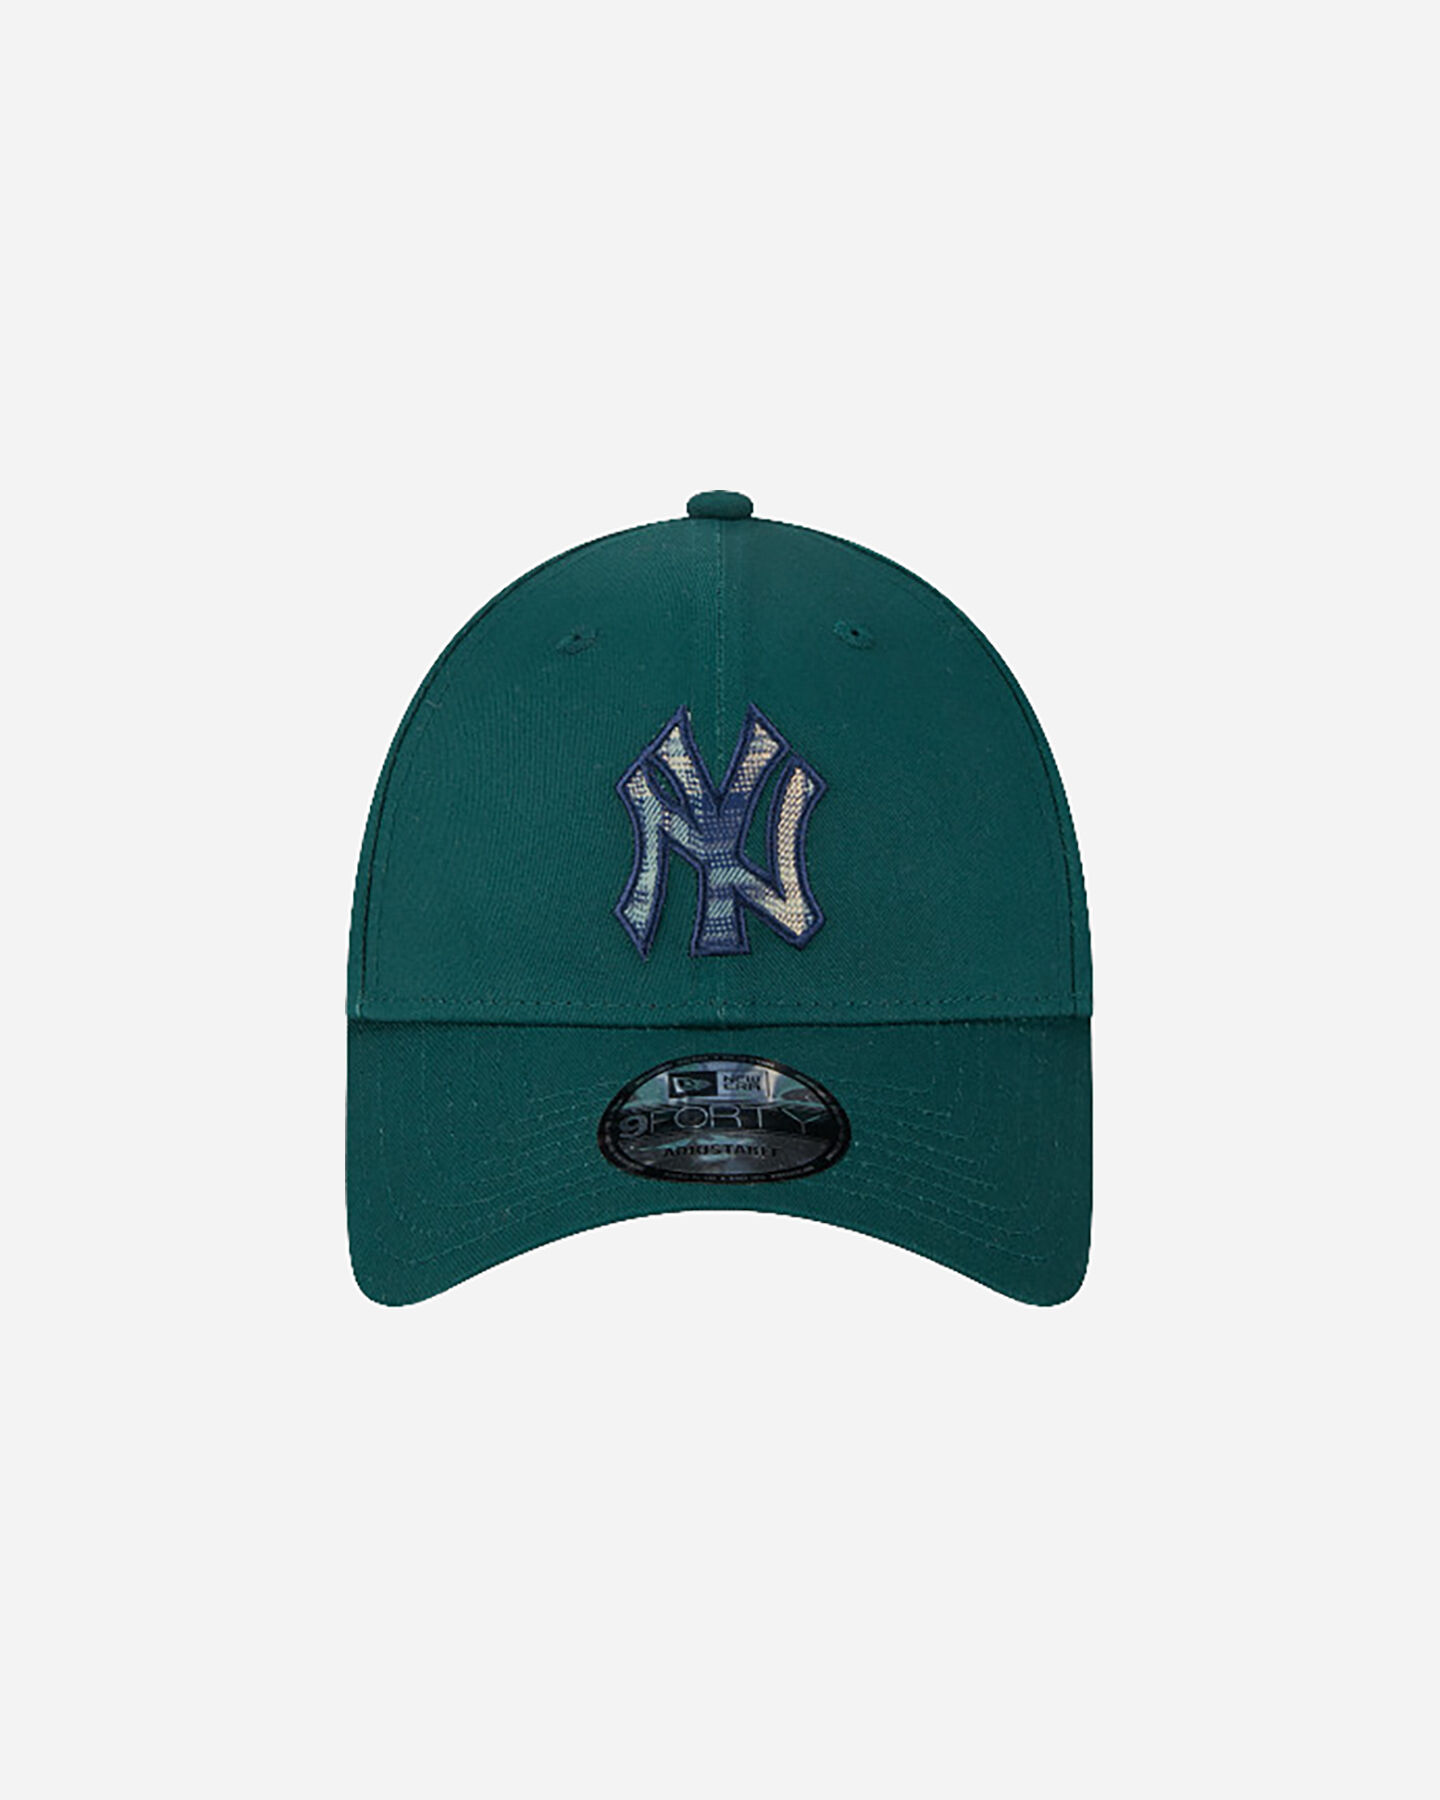  Cappellino NEW ERA 9FORTY MLB CHECK INFILL NEW YORK YANKEES  S5630872|301|OSFM scatto 1